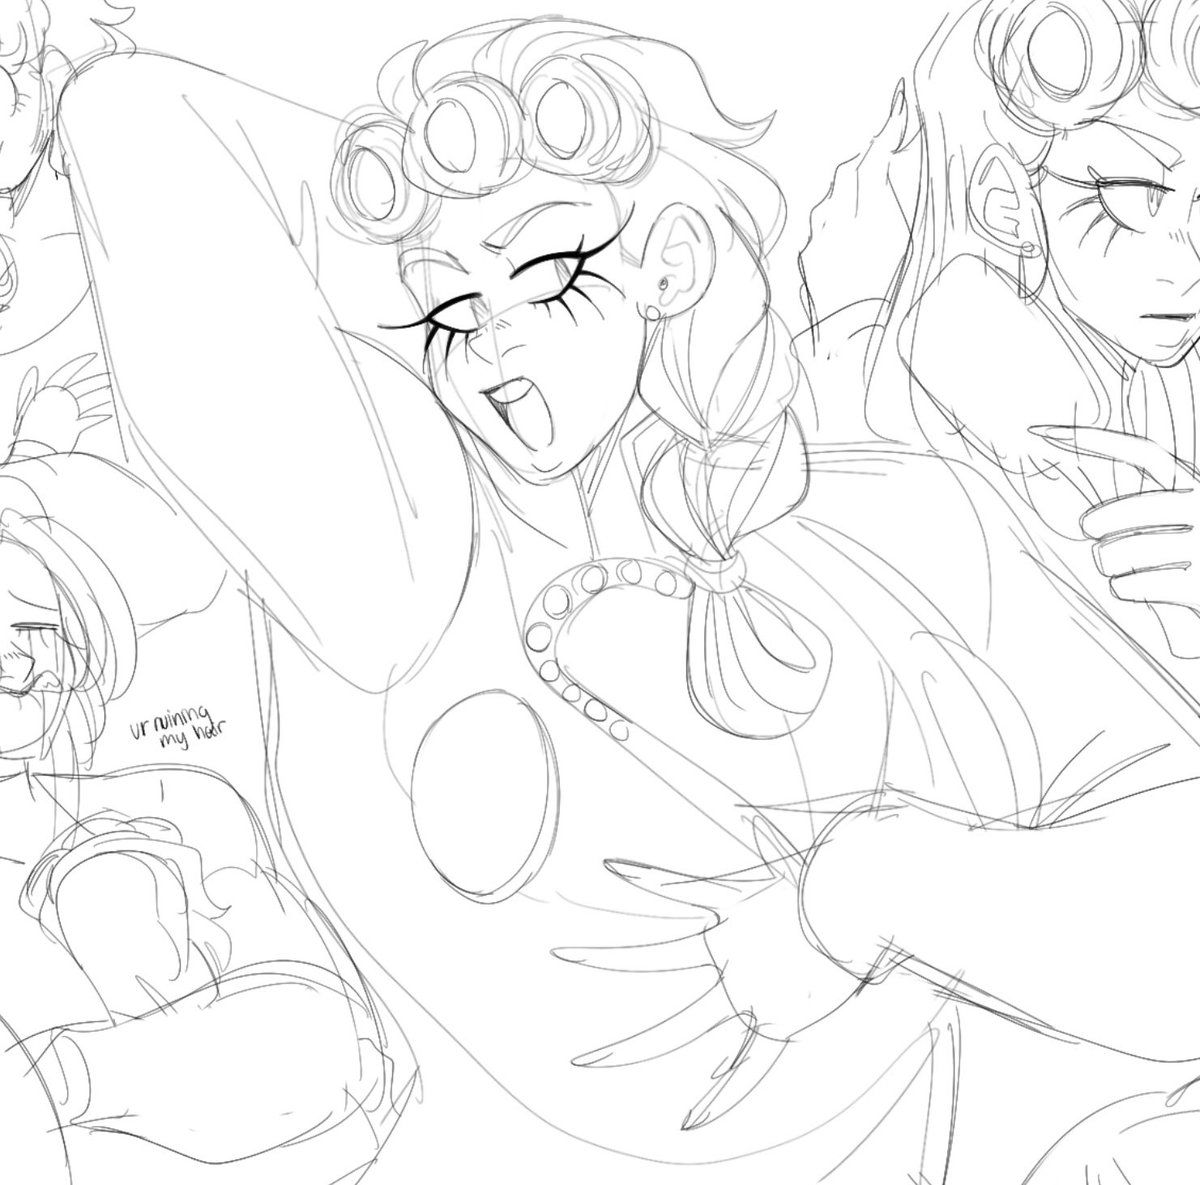 Halfway done with part 5 giorno's a gem to sketch 